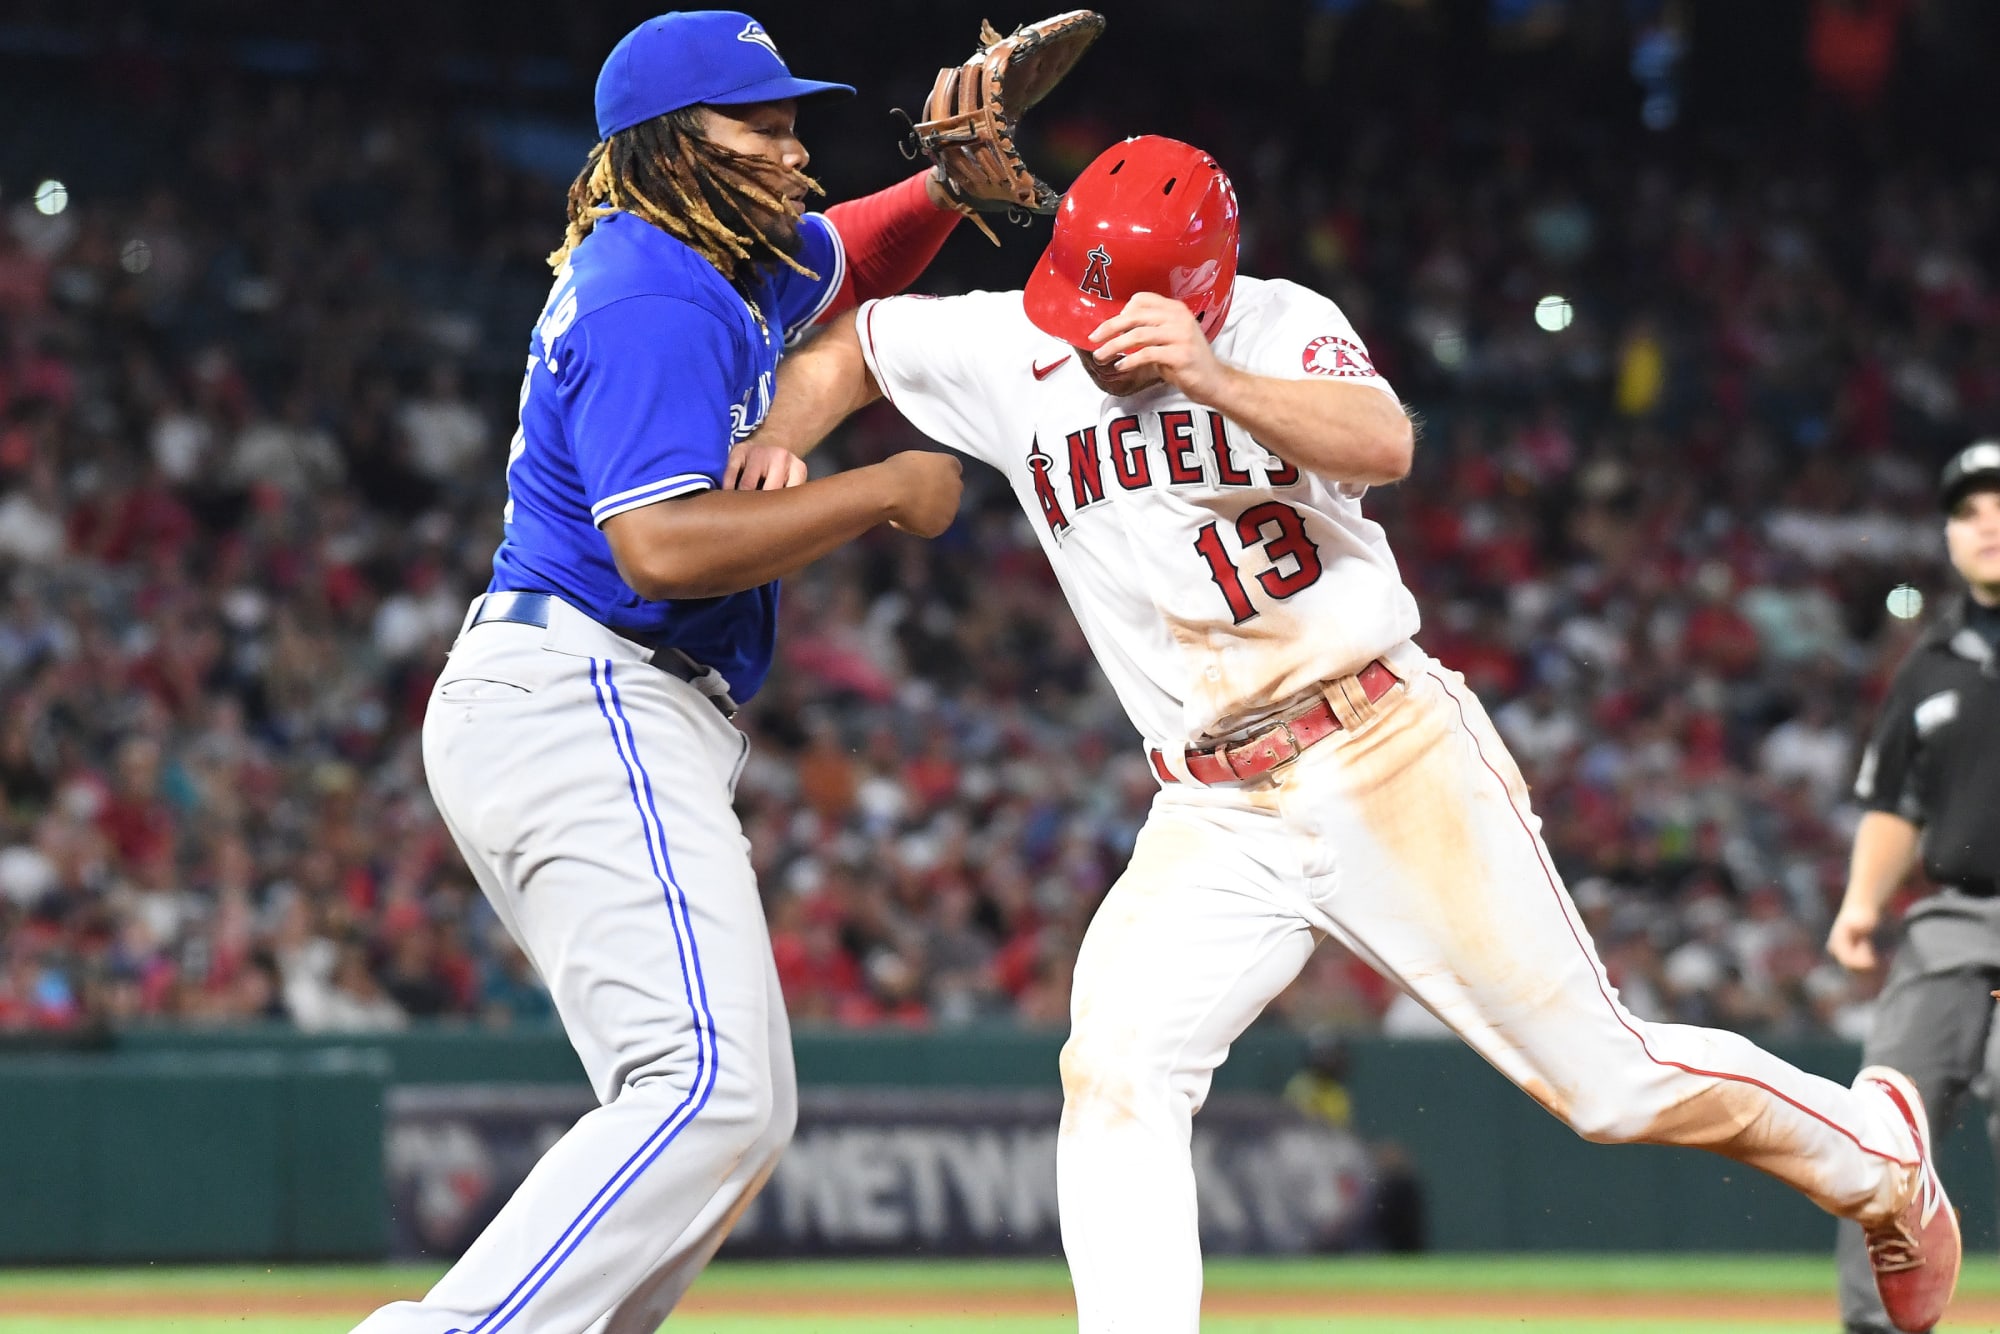 Blue Jays Ohtani shuts down the batting order to even series